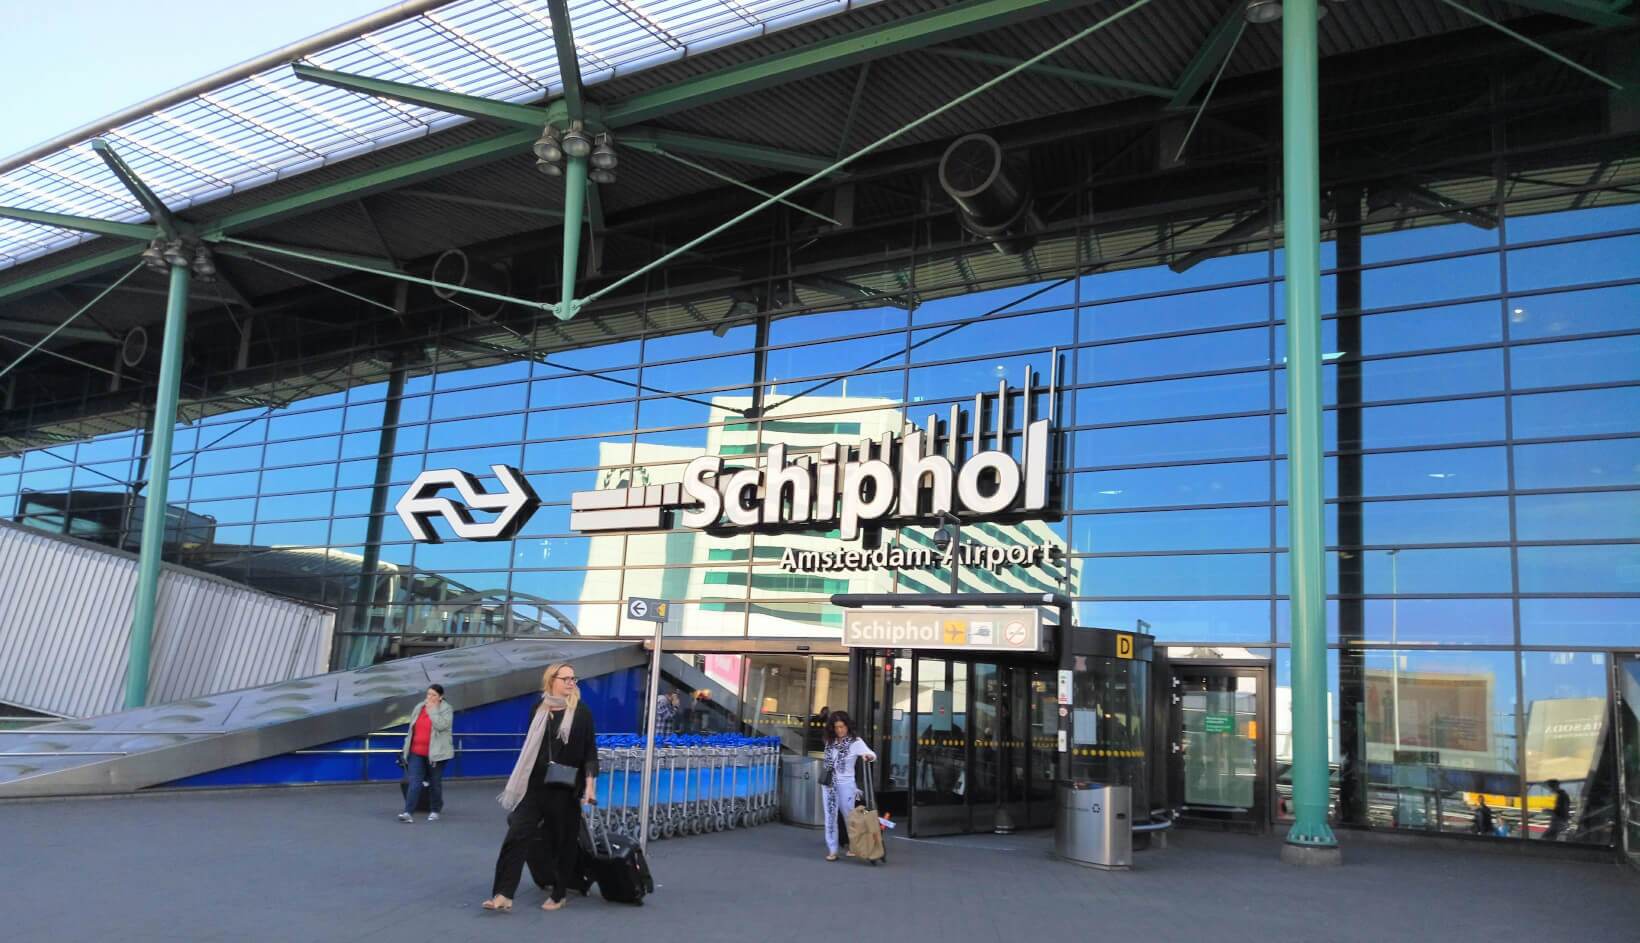 Amsterdam Schiphol Airport (AMS)